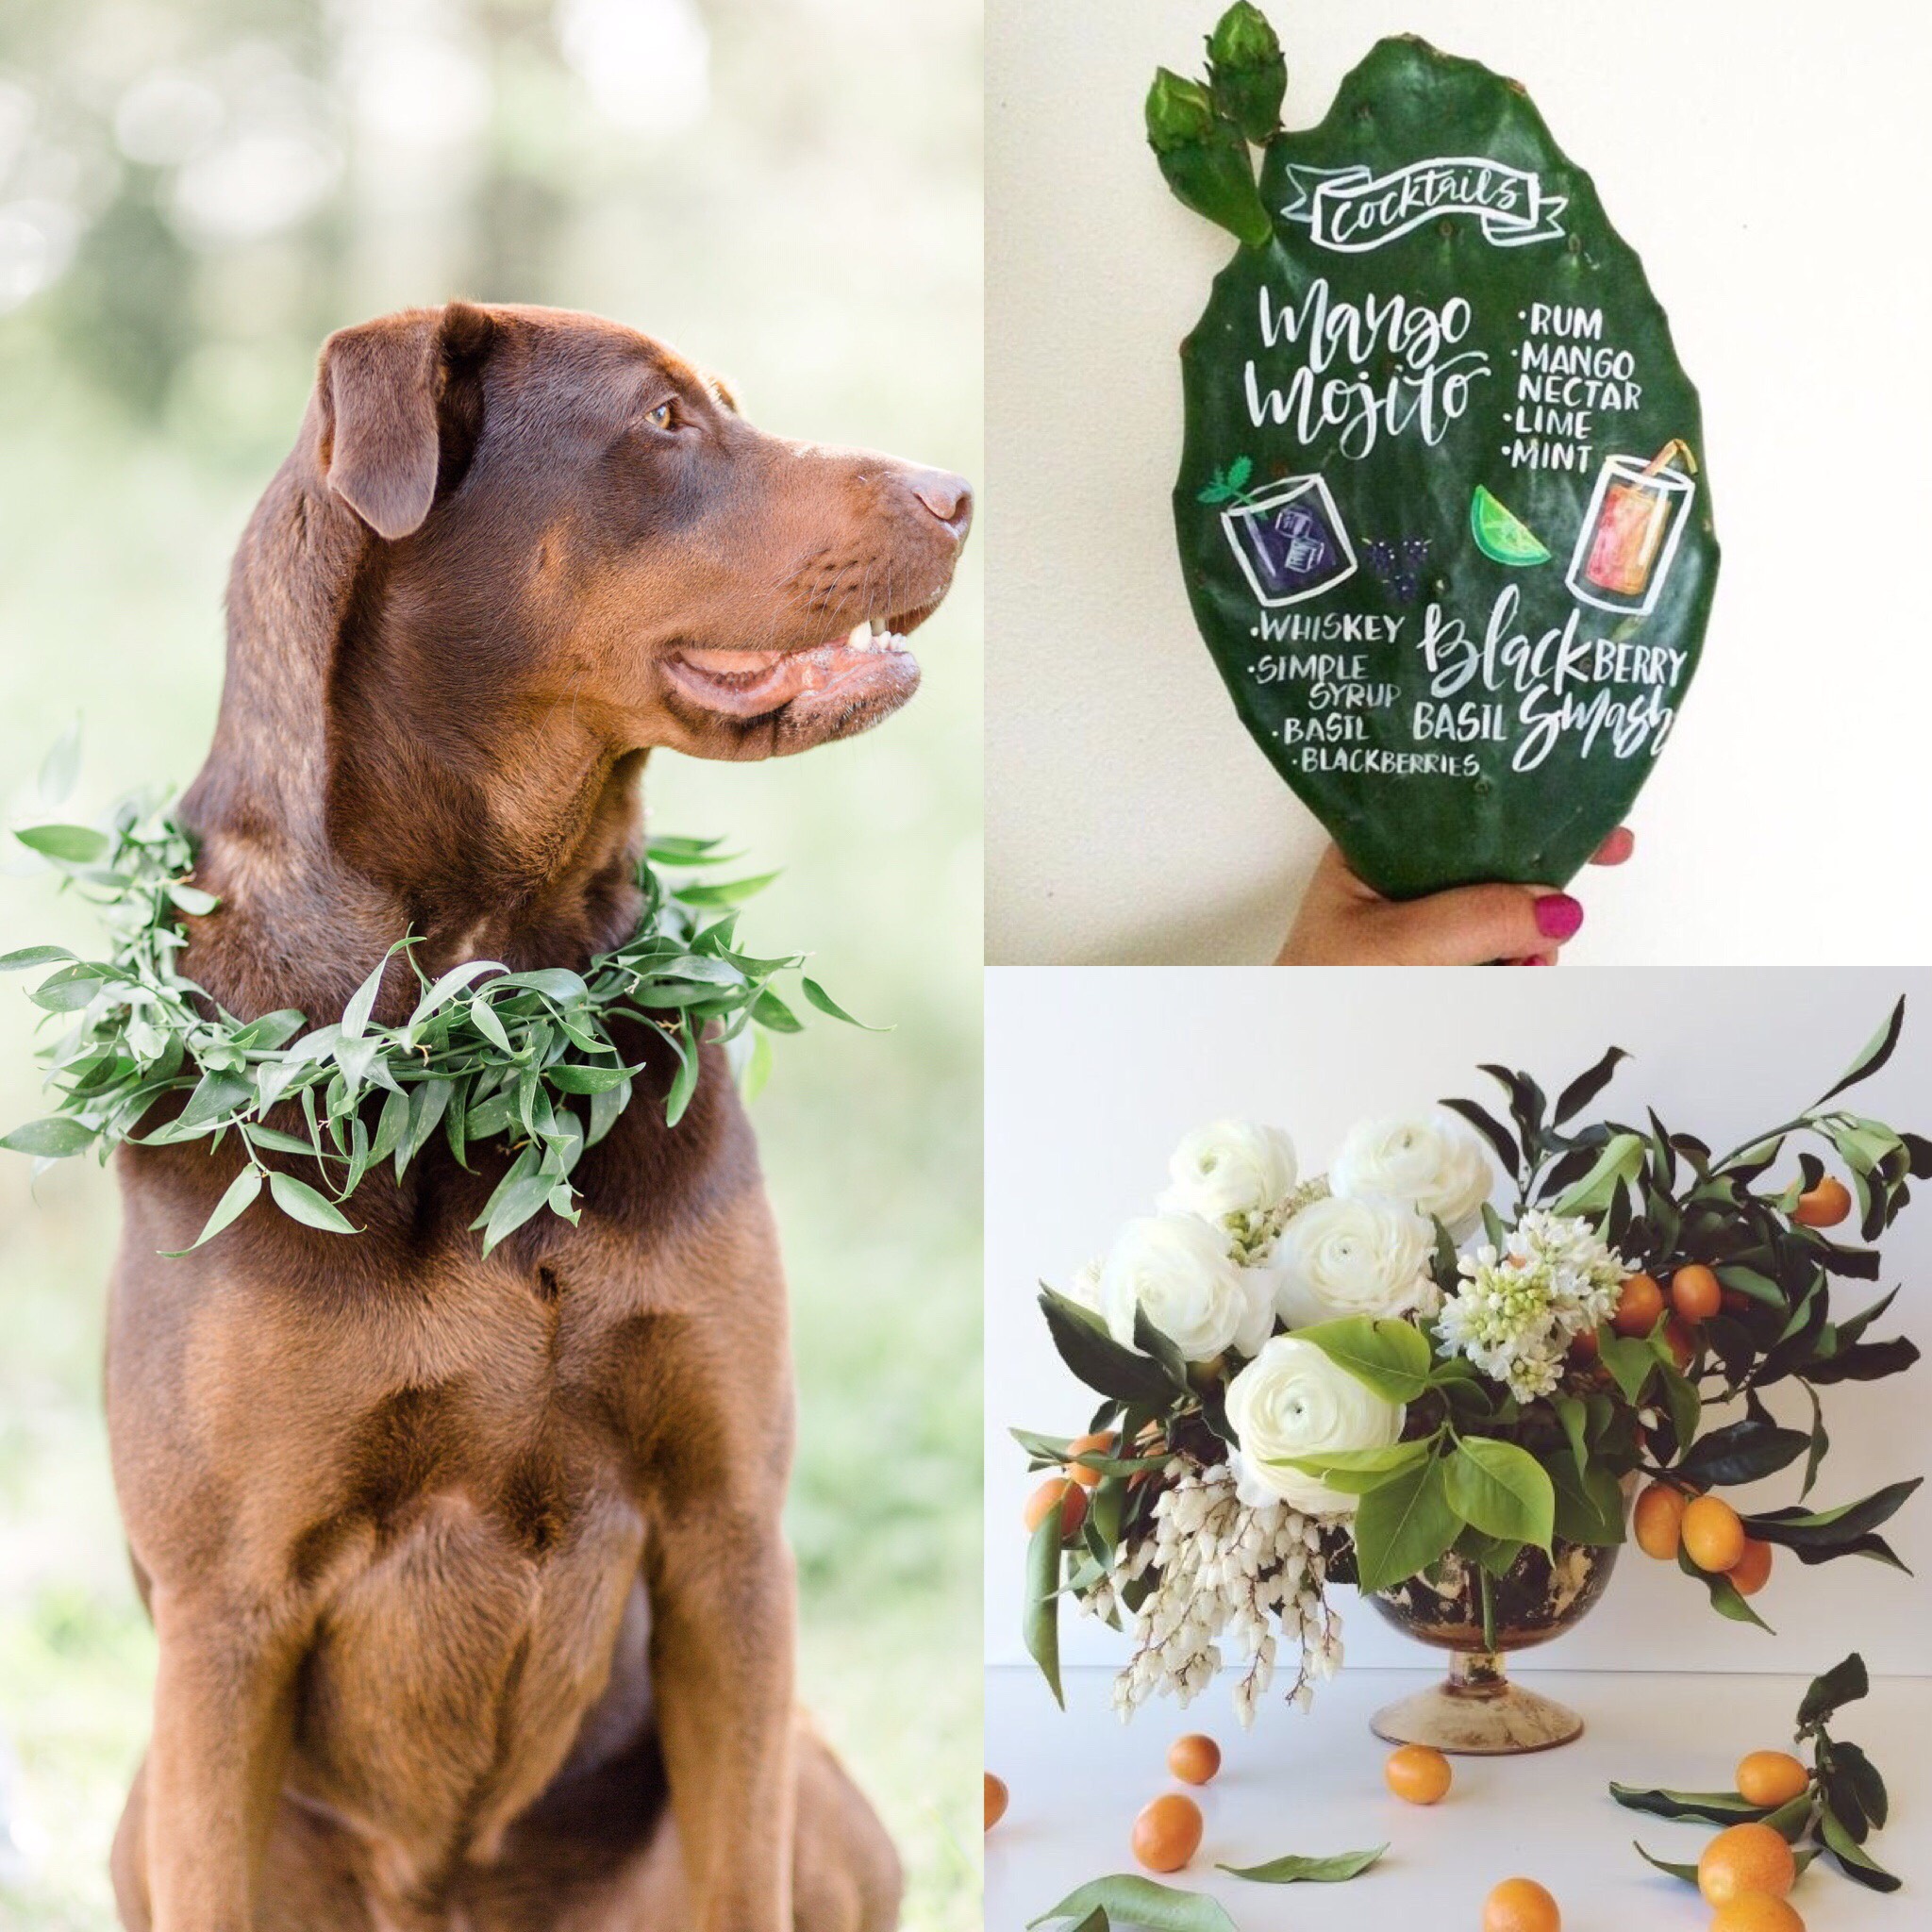 Gorgeous greenery ideas for your wedding day!